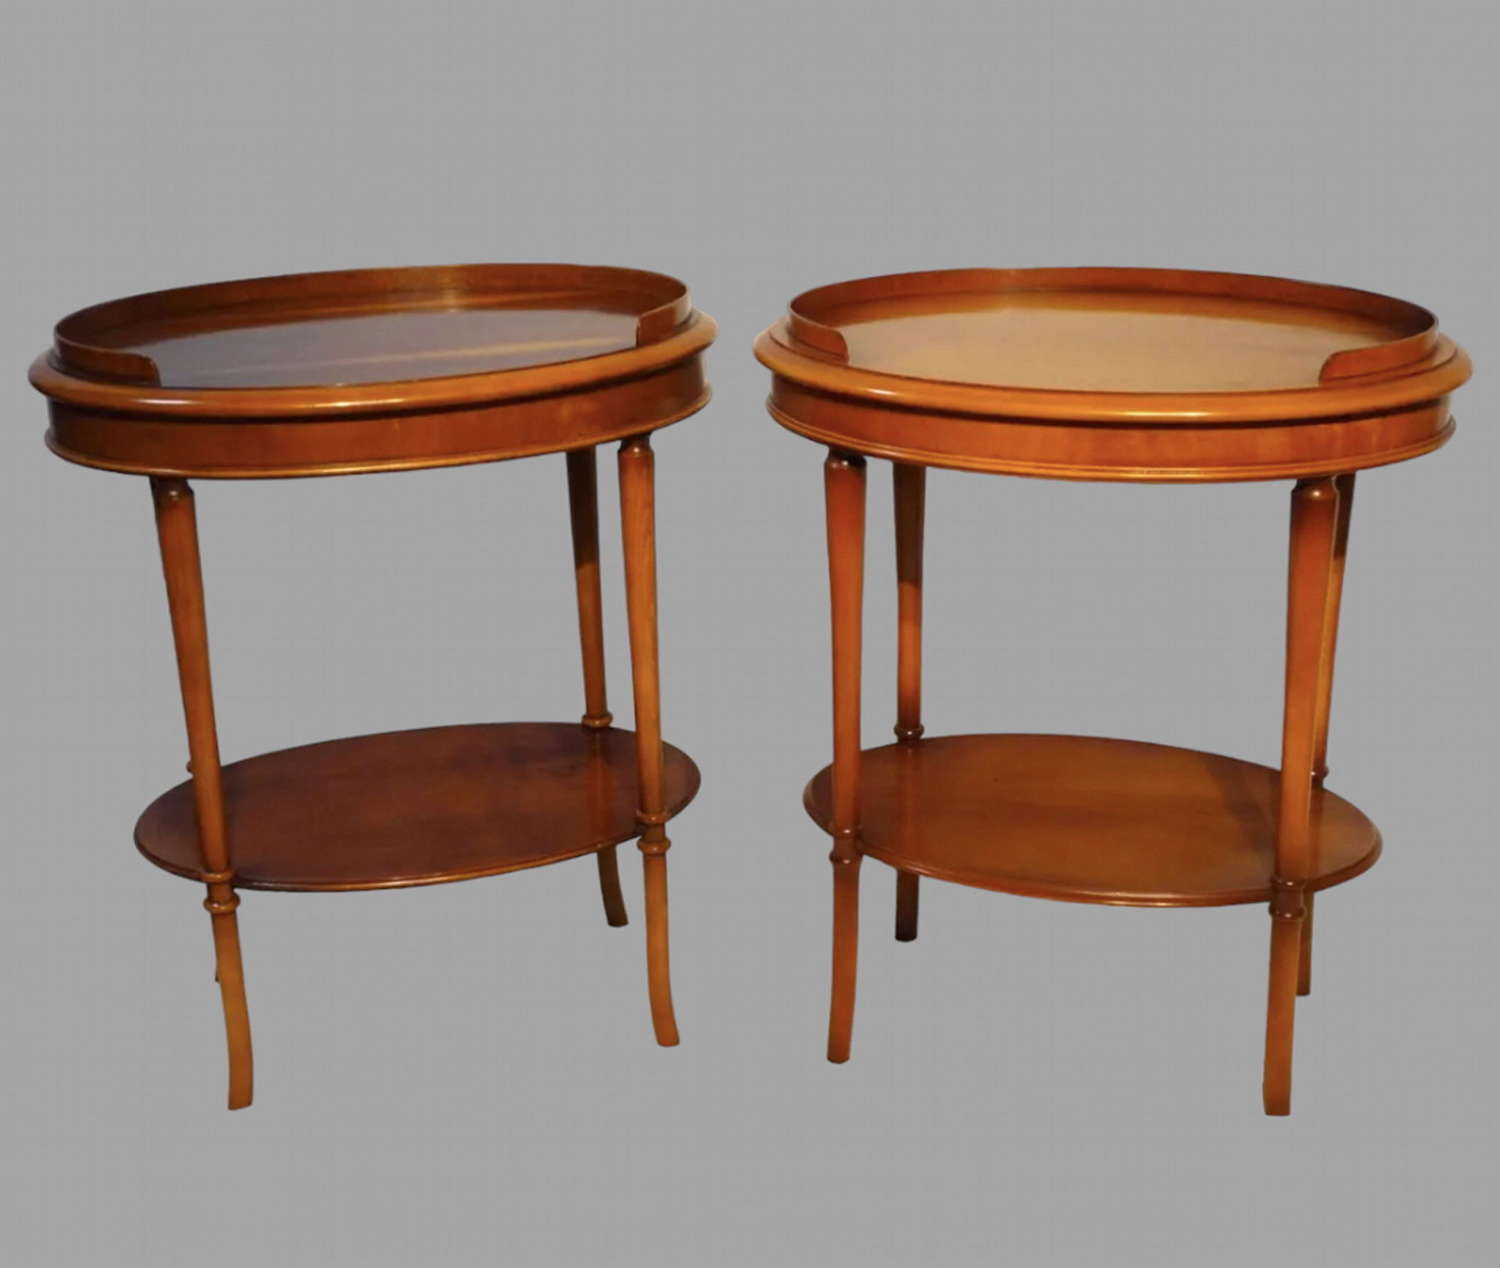 A Pair of Oval Lamp/Bedside Tables